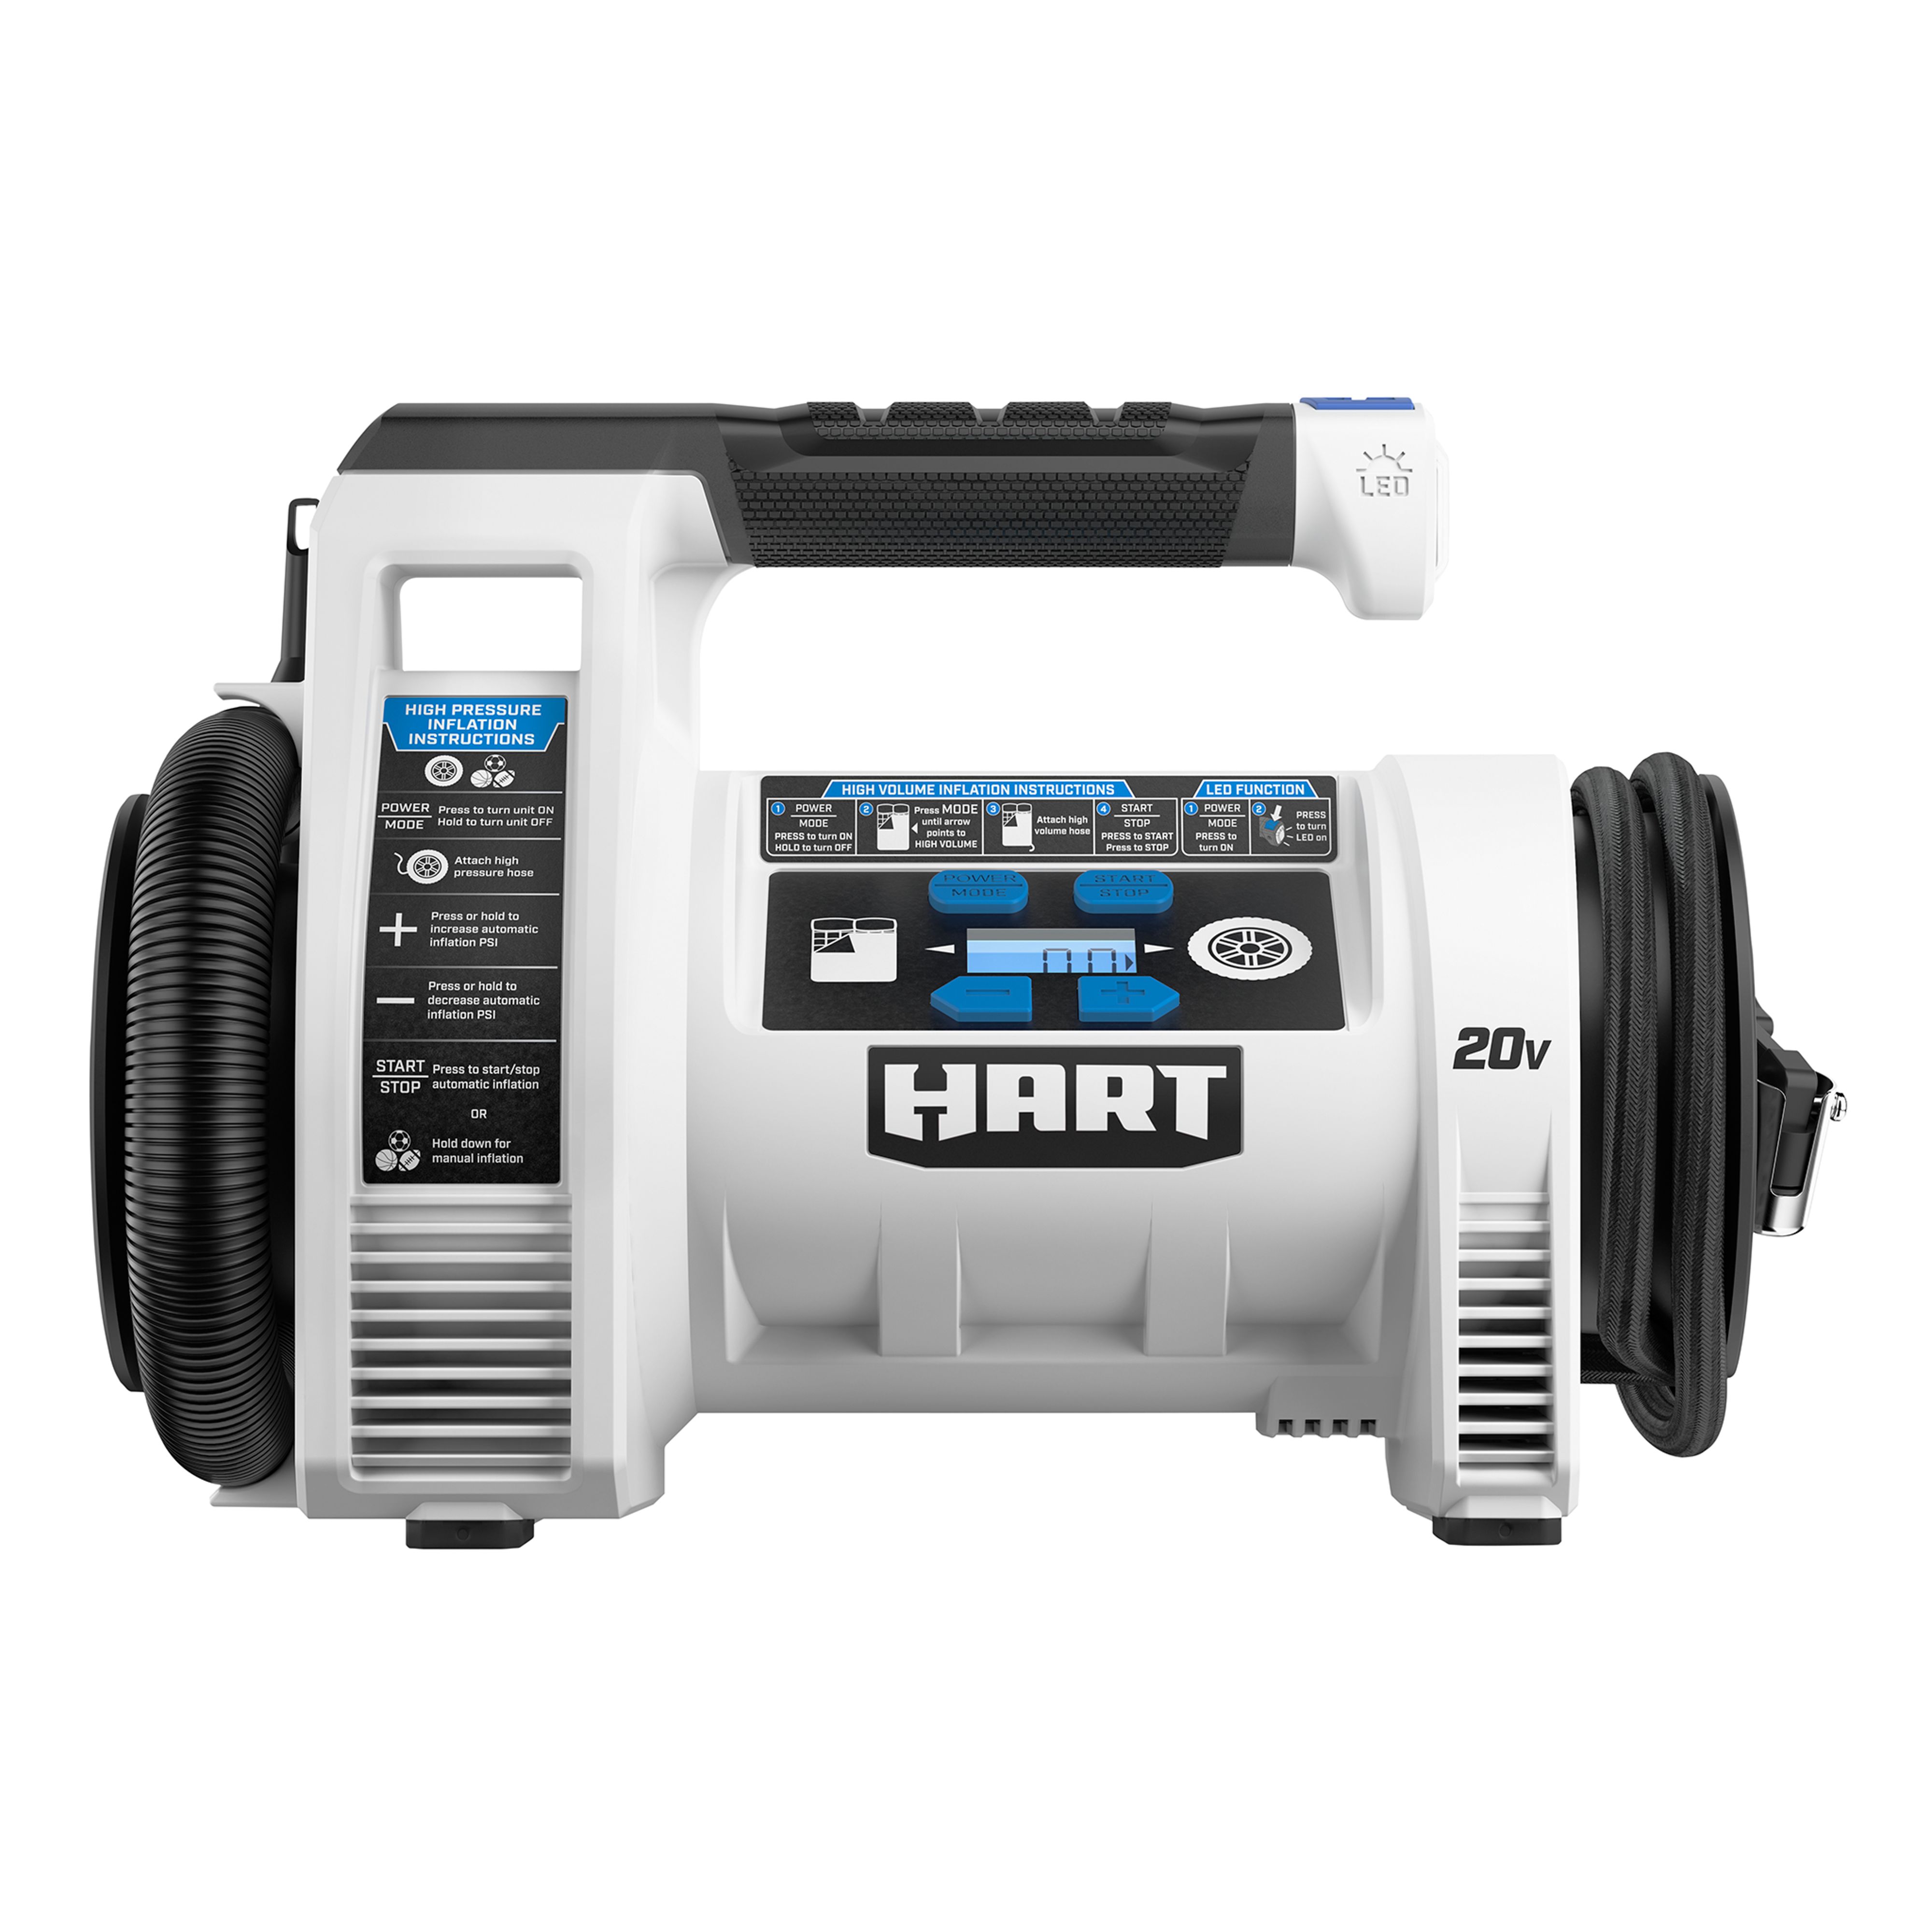 Hart cordless inflator dual funtion $29.55